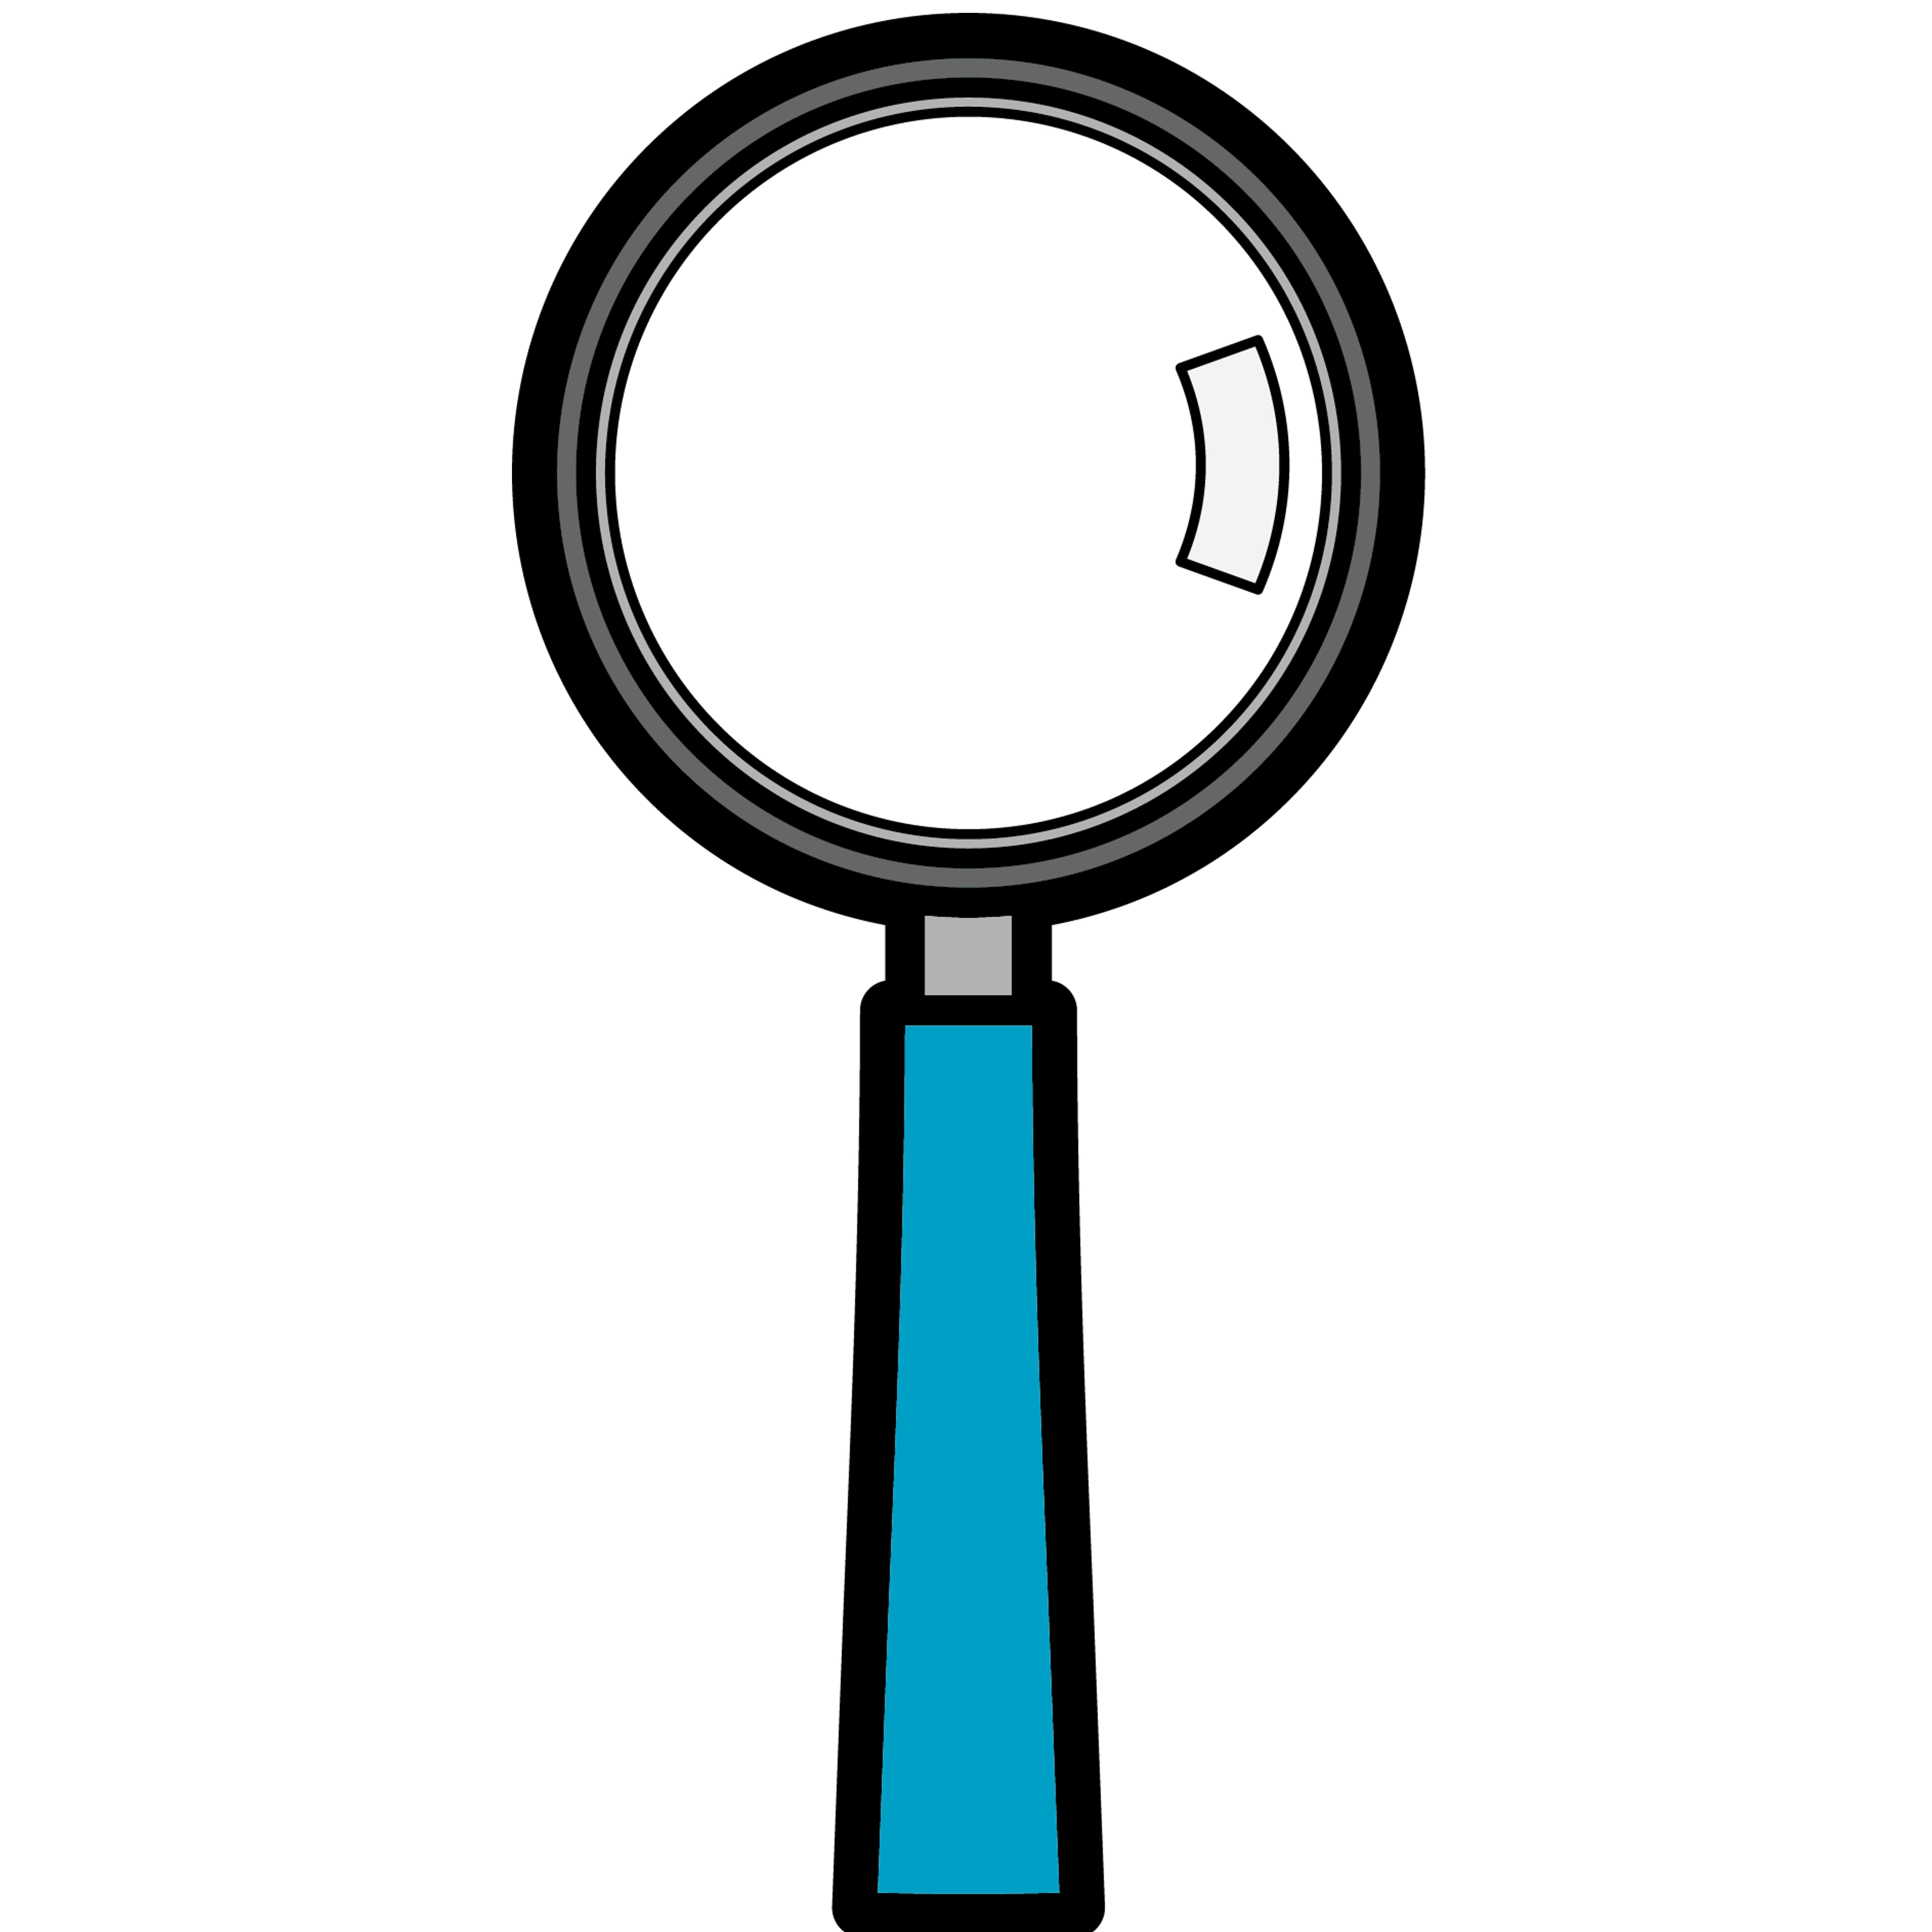 Magnifying Glass Detective | Clipart Panda - Free Clipart Images